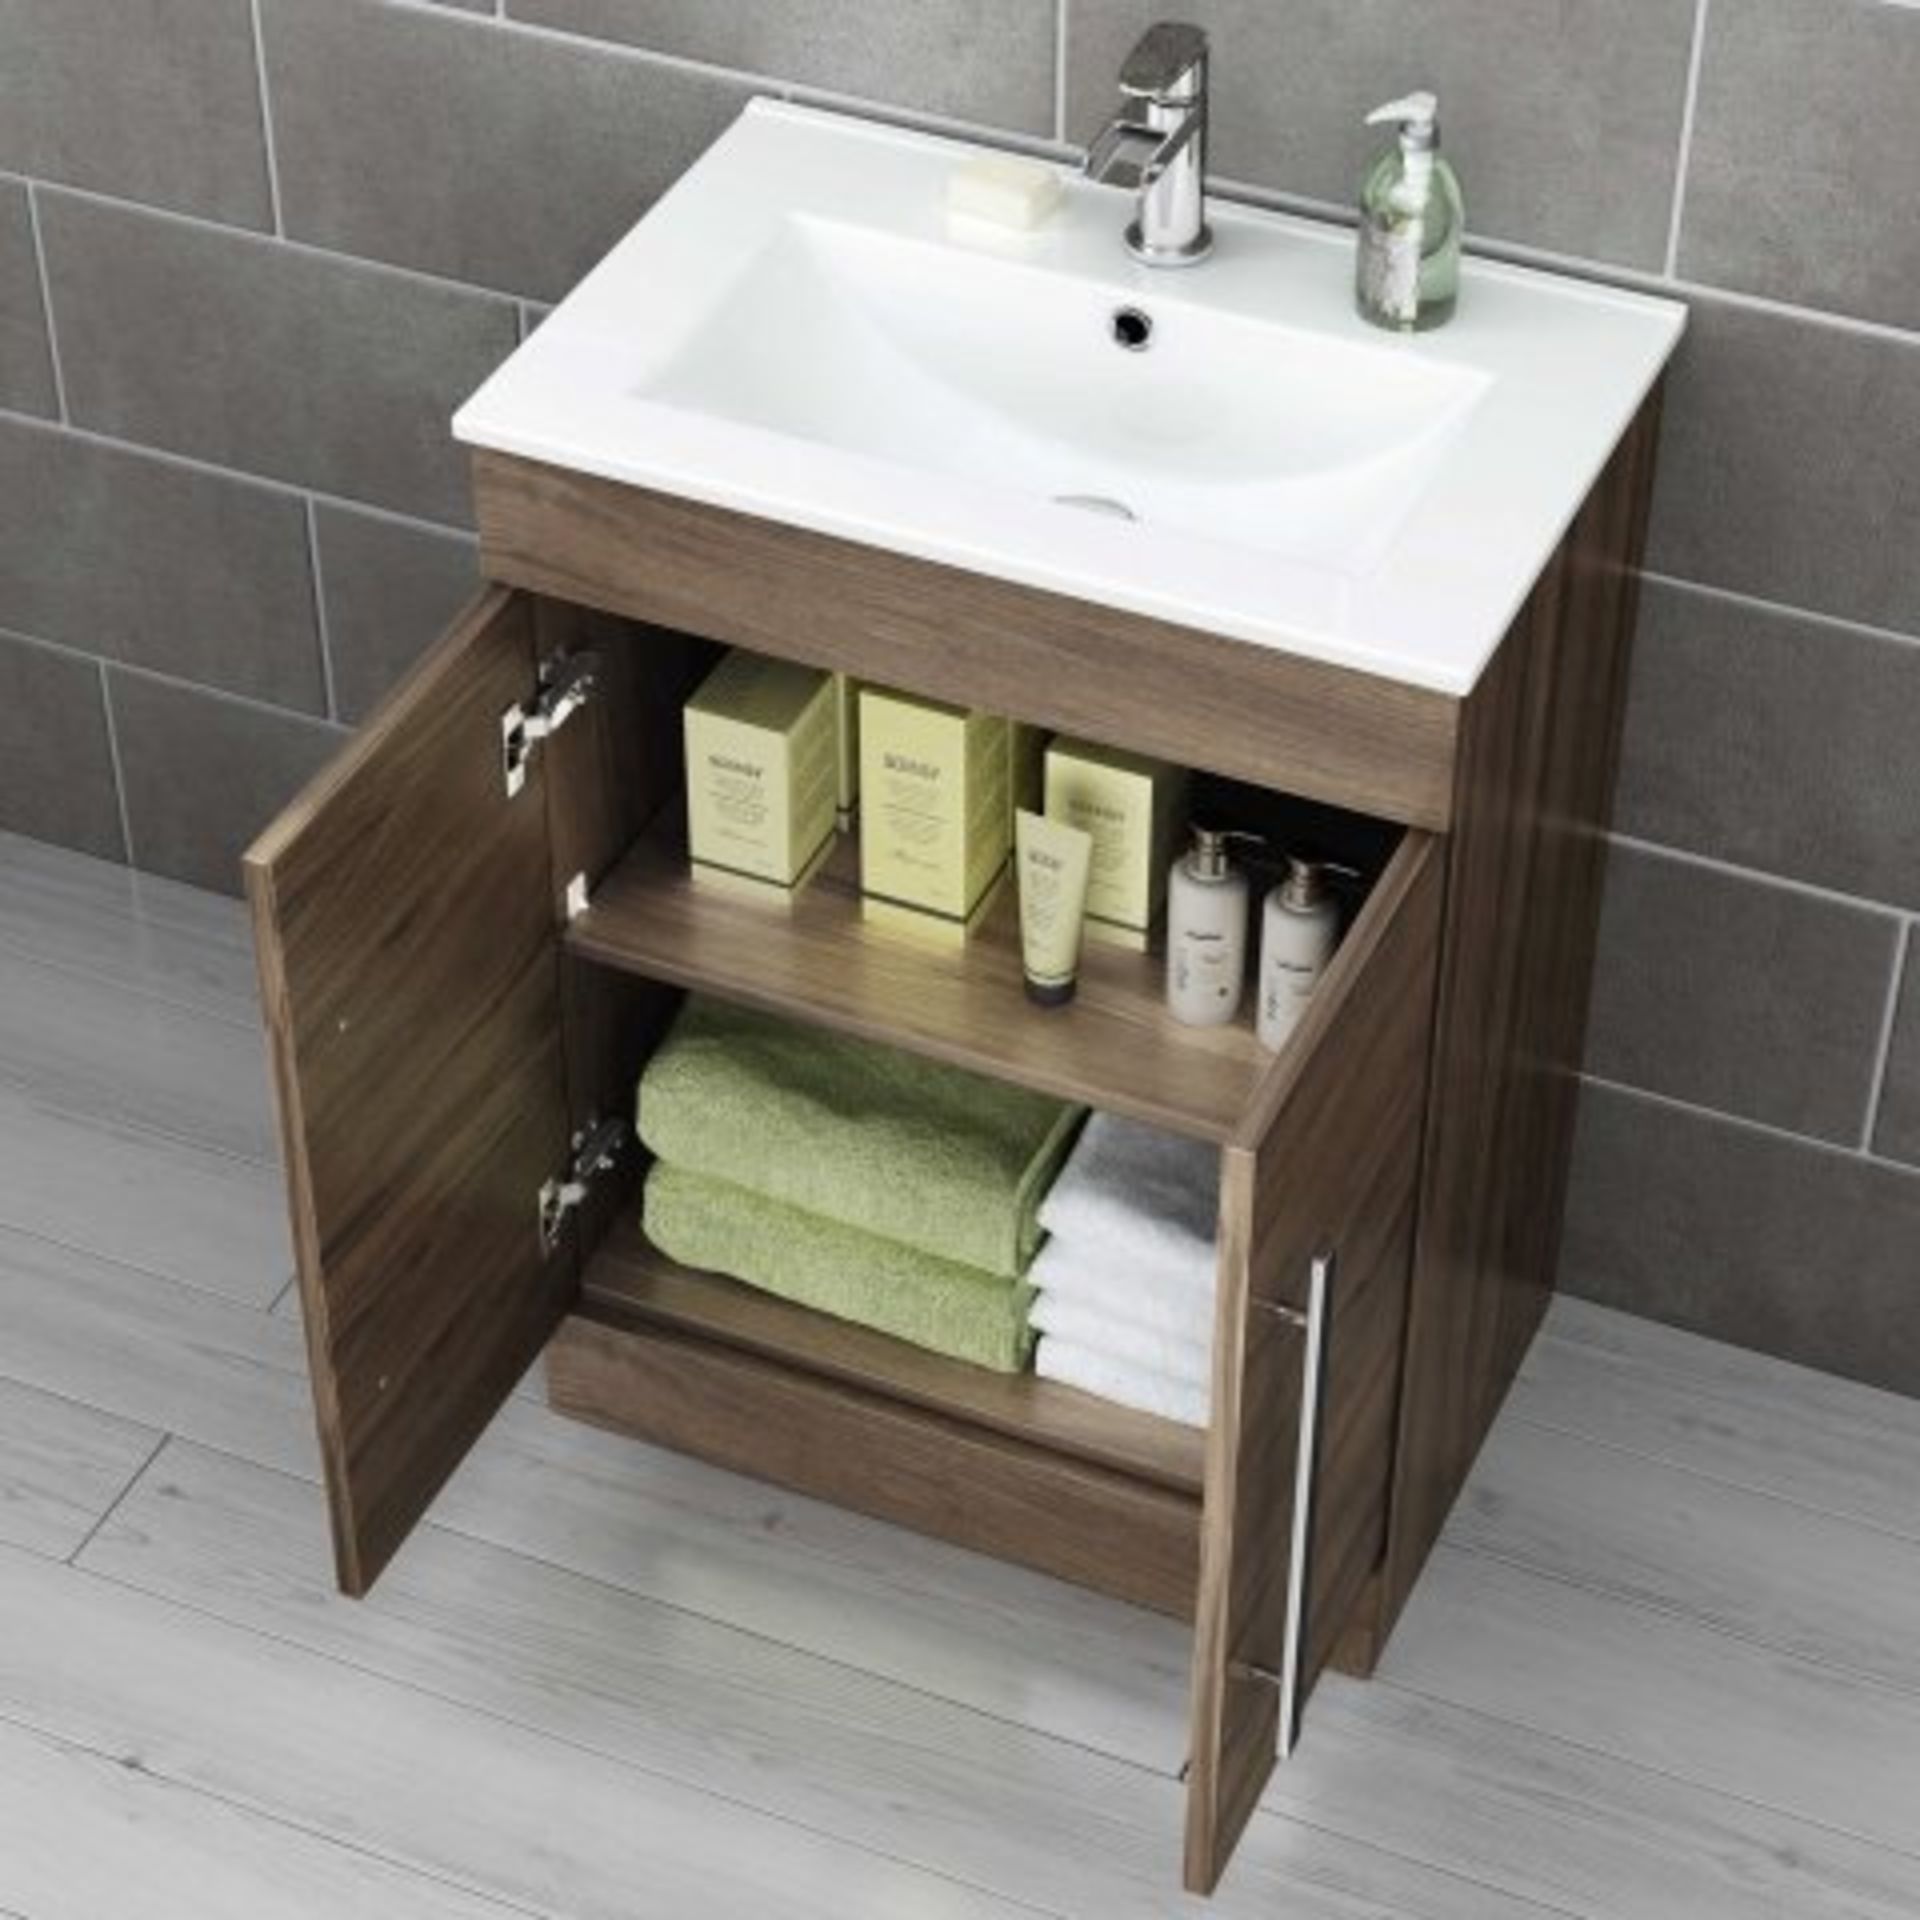 (H46) 600mm Avon Walnut Effect Basin Cabinet - Floor Standing. RRP £499.99. COMES COMPLETE WITH - Image 5 of 5